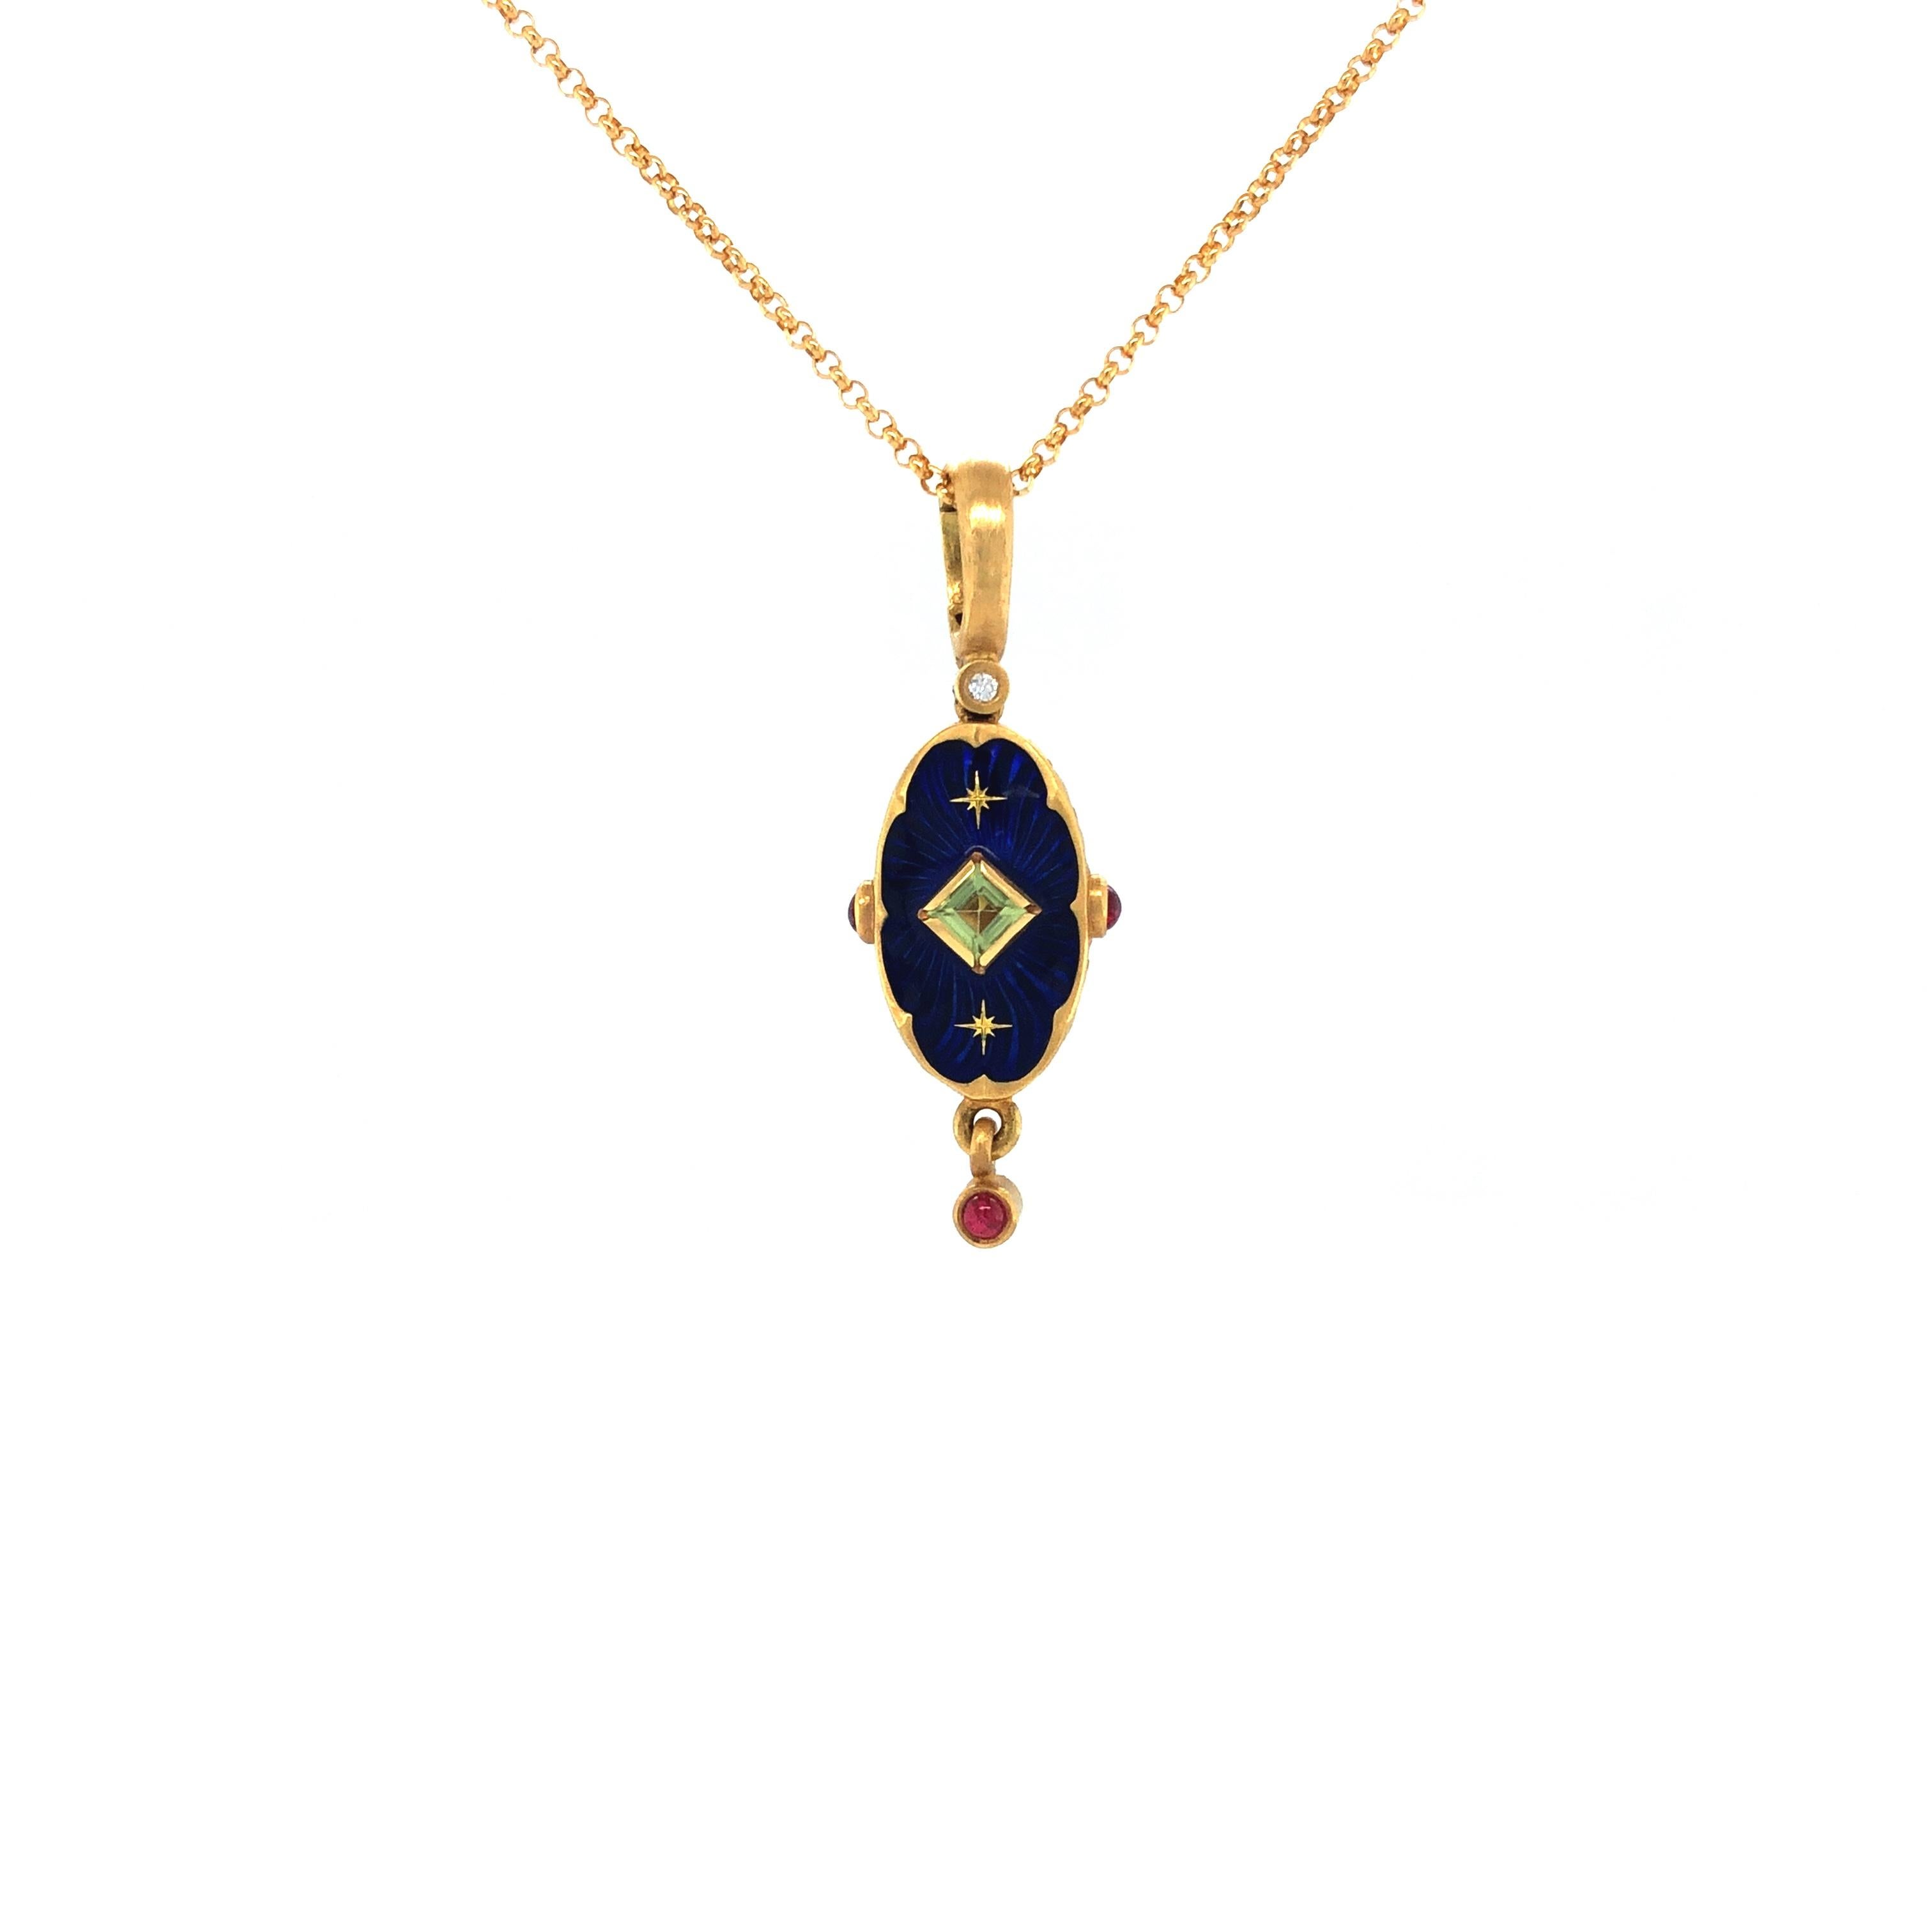 Victor Mayer oval pendant necklace 18k yellow gold, blue Guilloche vitreous enamel, 1 Peridot, 3 Rubies, 2 Gold Star Paillons 

About Victor Mayer 
Sensual, exotic, urbane and confident, Victor Mayer continues a 130 year tradition of classically